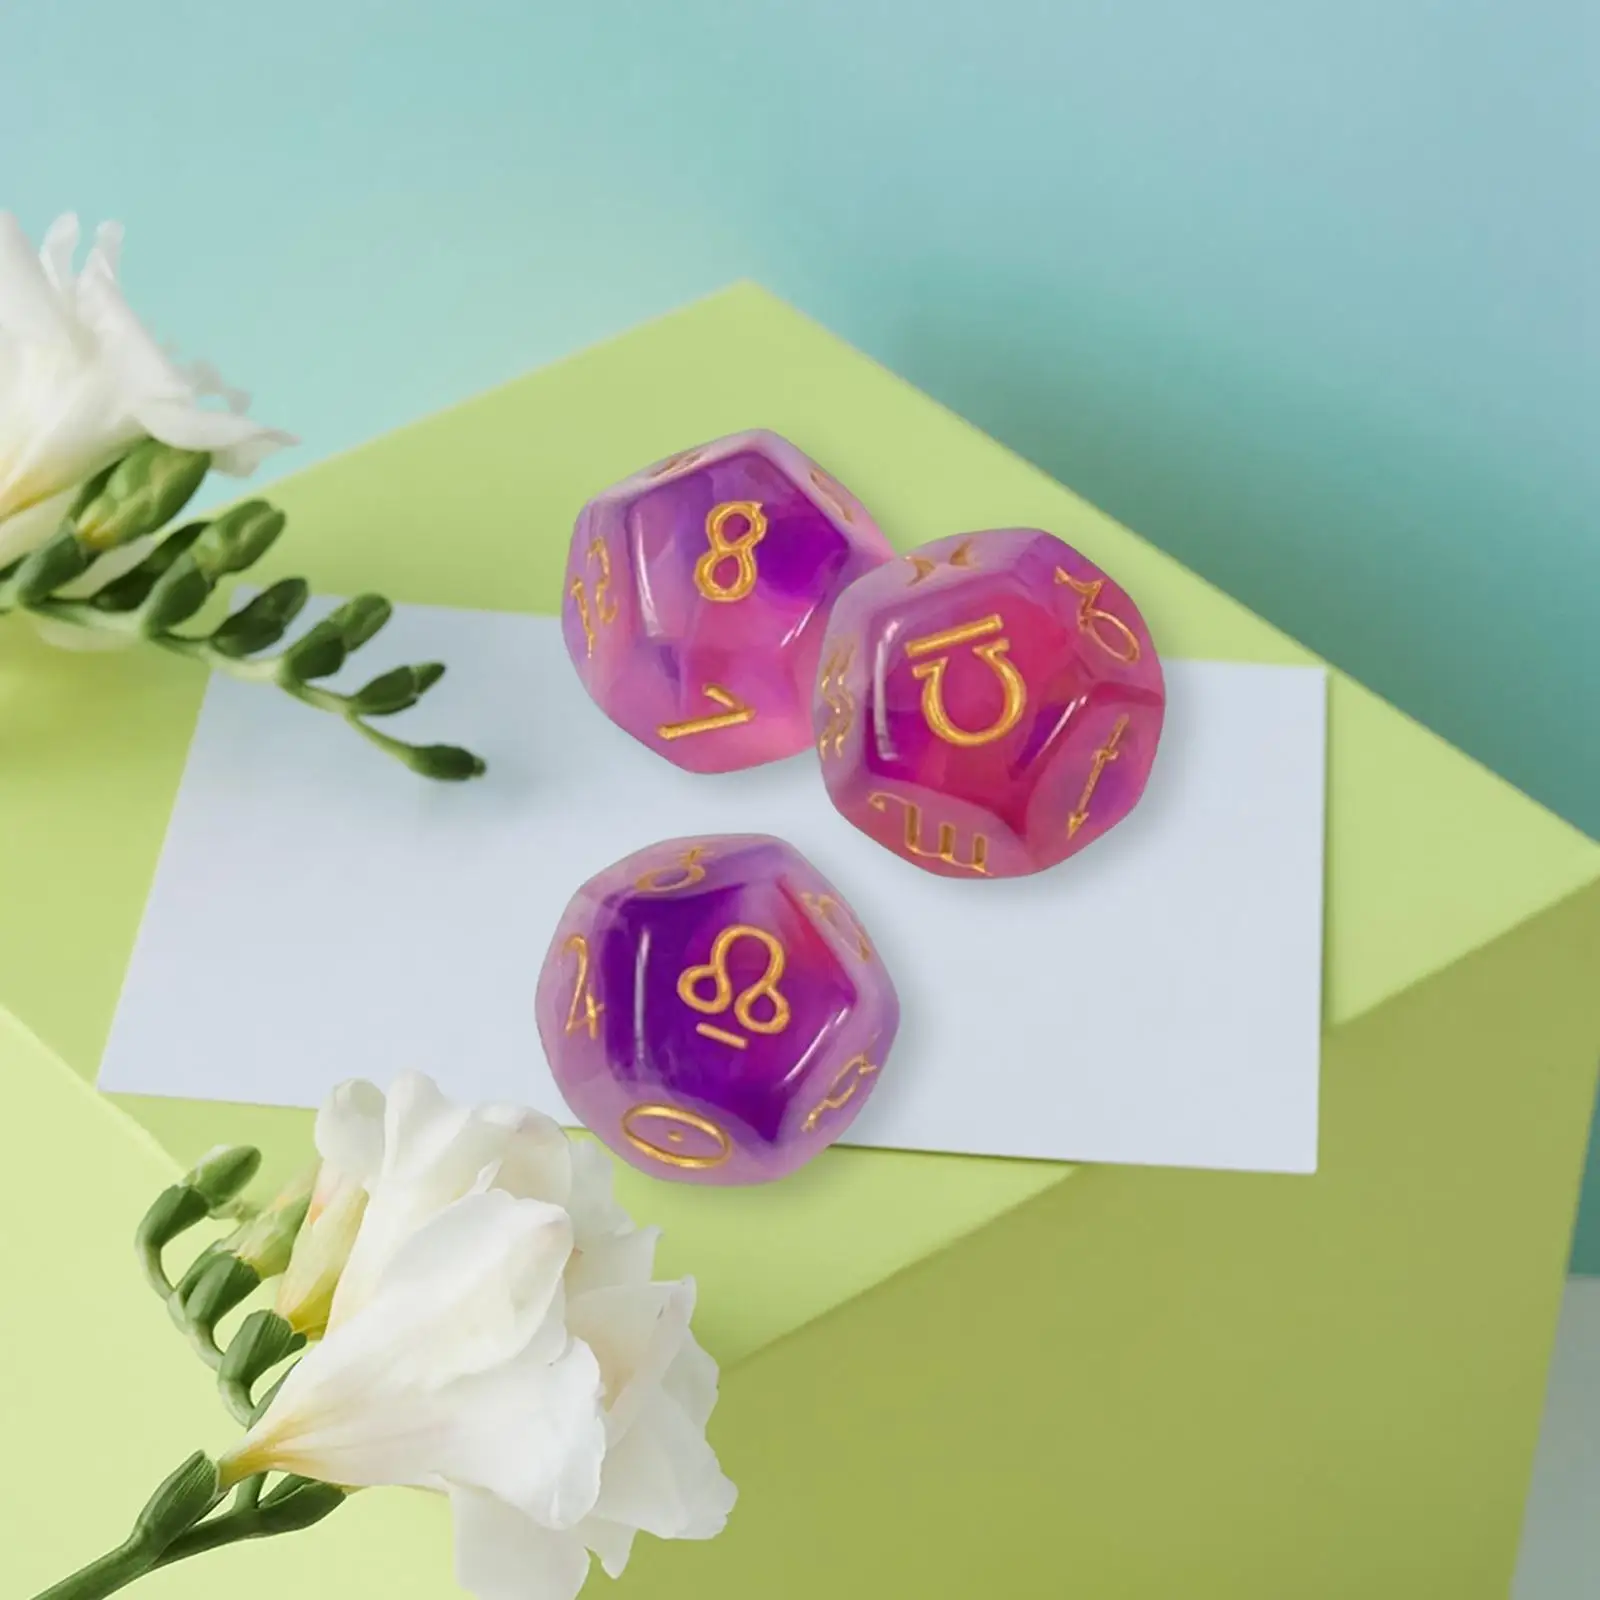 3 Pieces Astrology Divination Dice Zodiac Astrology Planets Dice Set for Constellation Toy Role Playing Game Tarot Divination